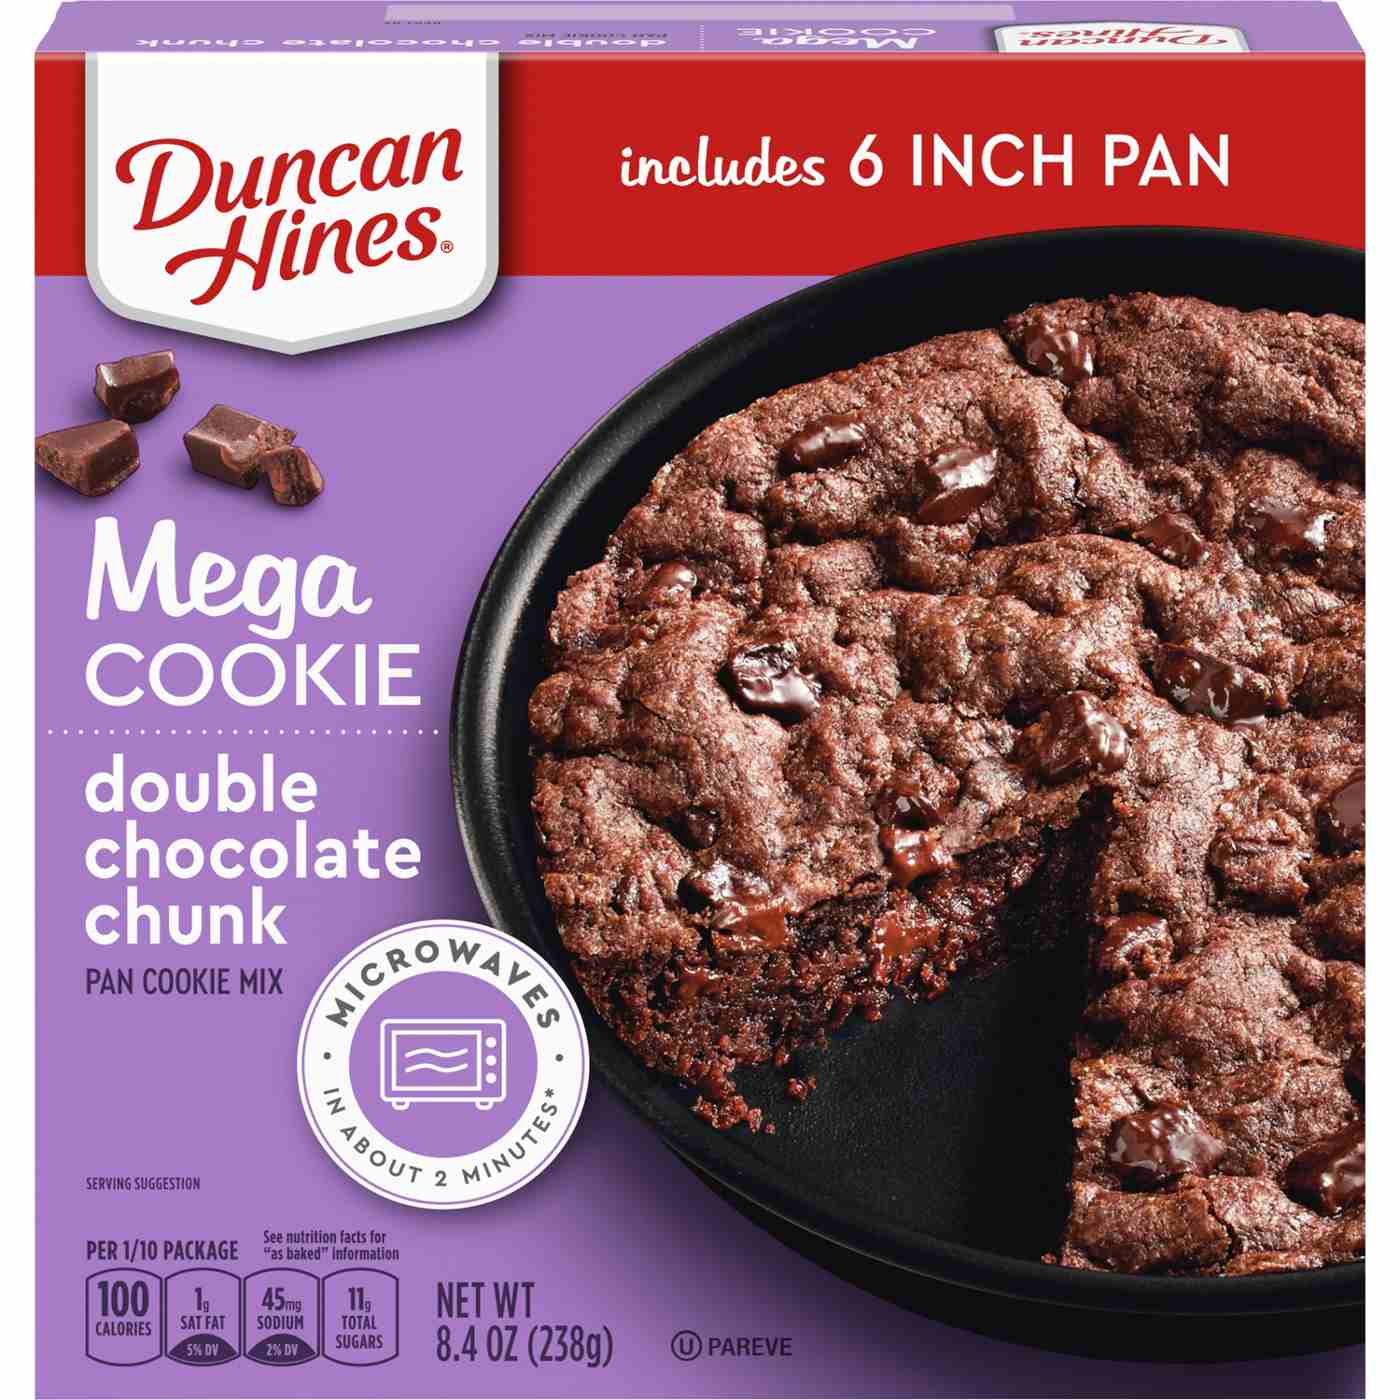 Duncan Hines Mega Cookie Double Chocolate Chunk Pan Cookie Mix; image 1 of 7